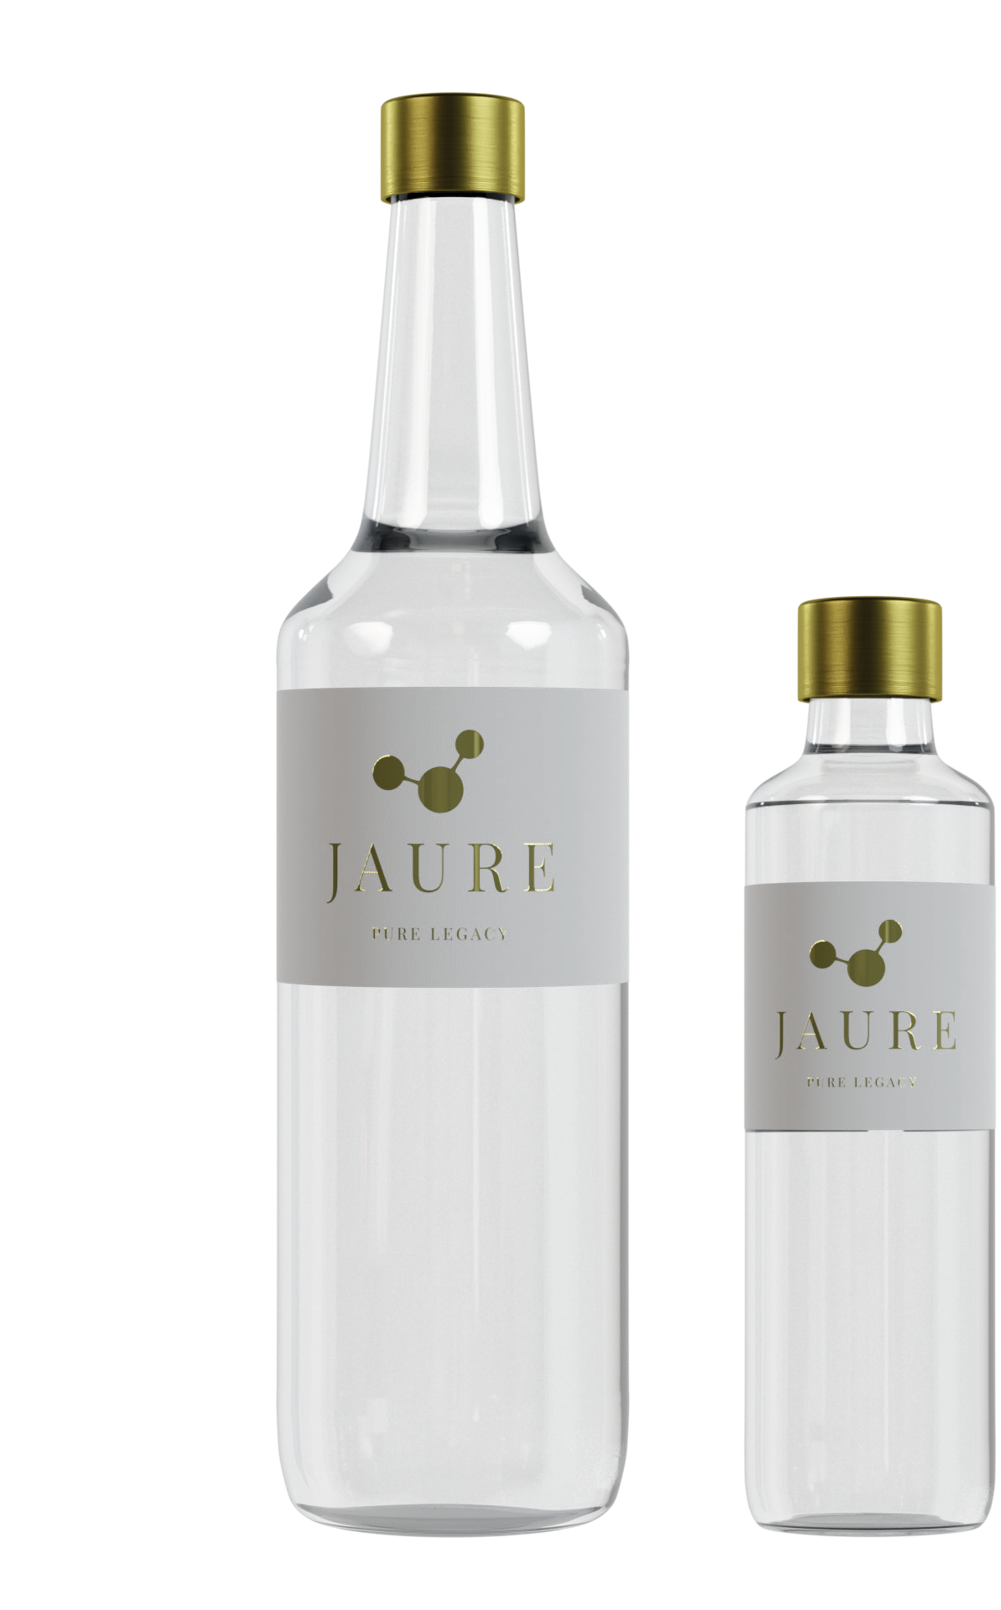 What is Jaure water?